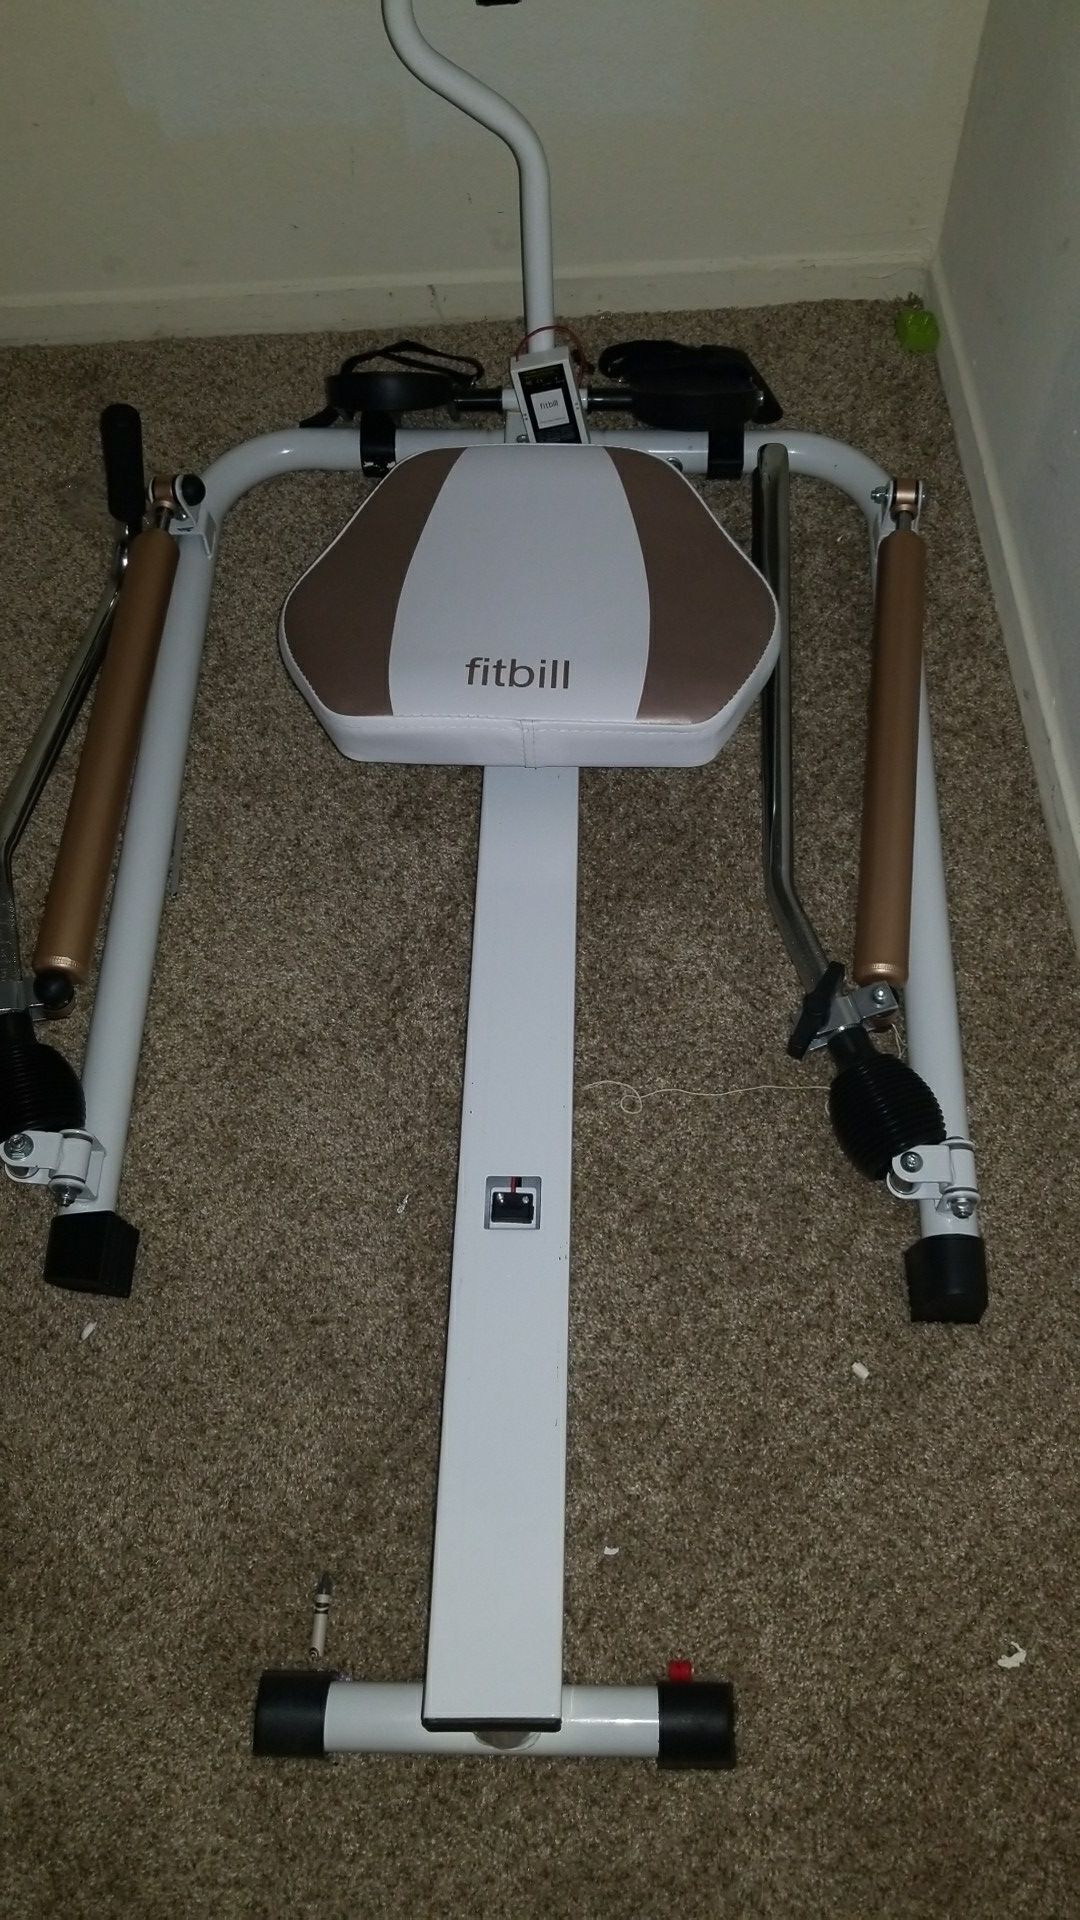 FREE Fitbill Rowing/Exercise Machine